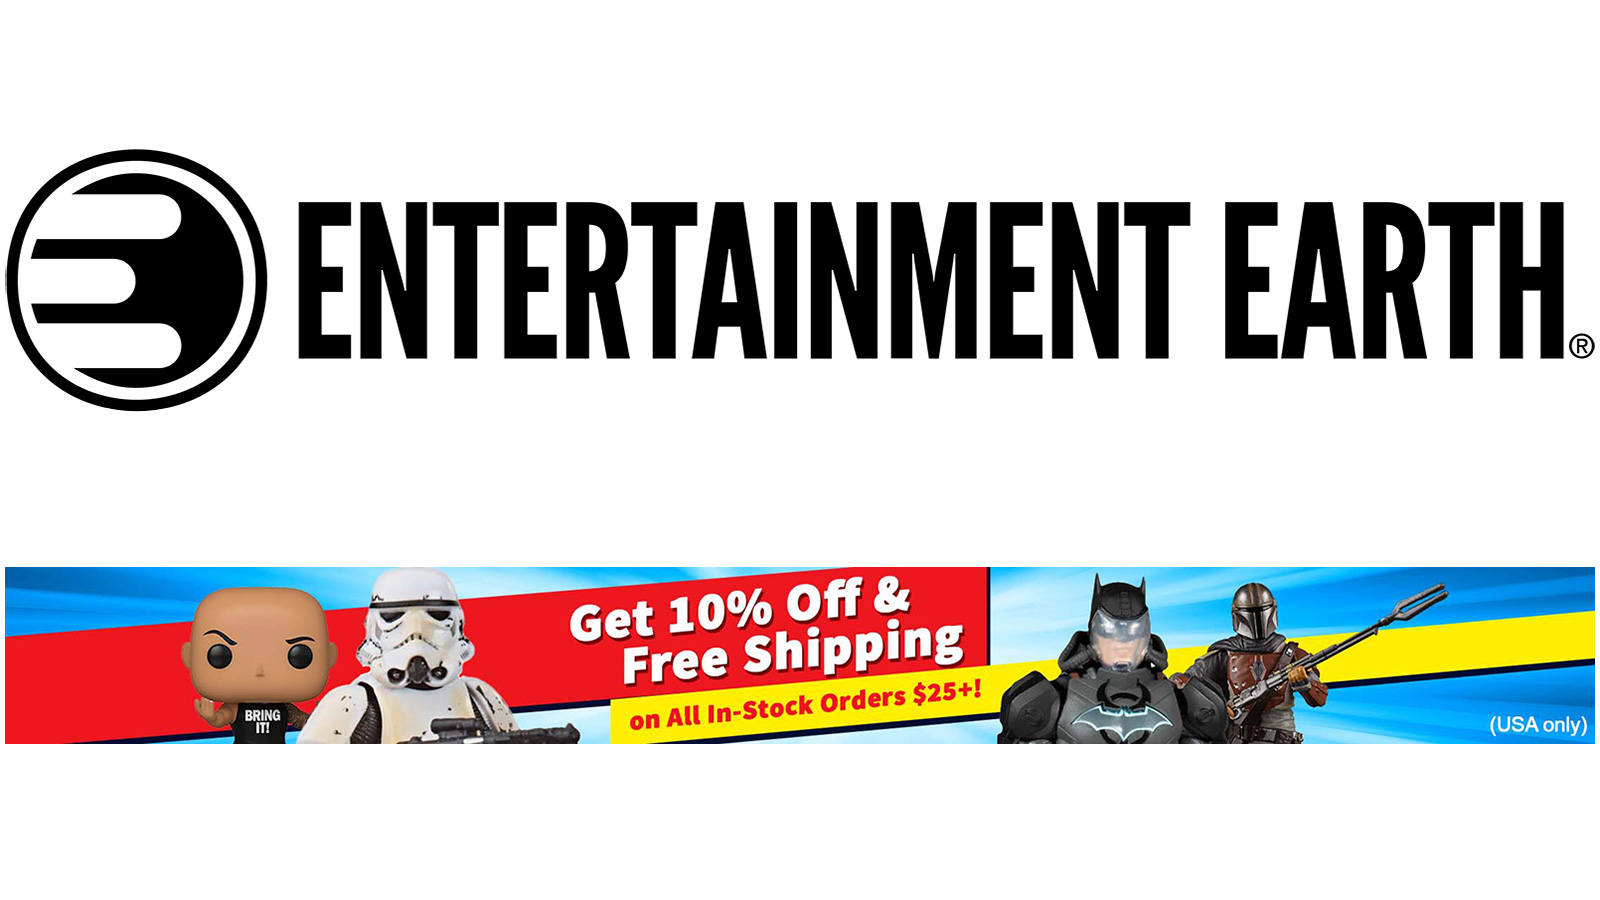 Entertainment Earth 10% Off Sale - February 28th to March 15th, All In-stock Orders $25 Or More And Enjoy Free Shipping (USA Only)